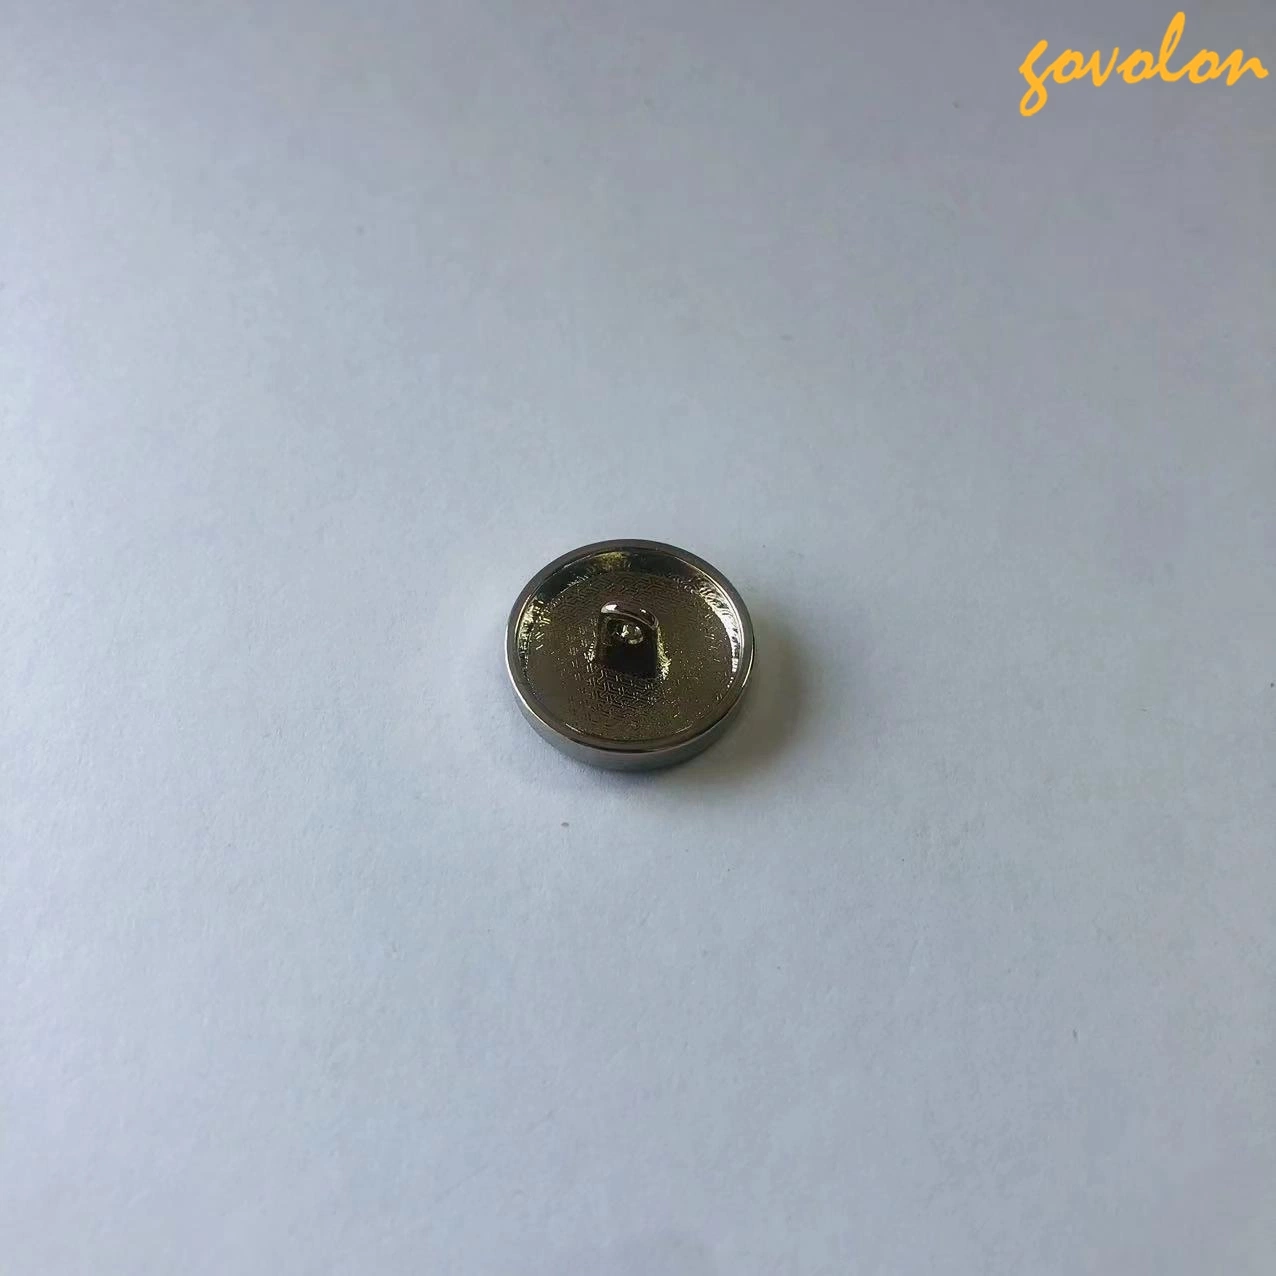 Simple Round Silver Metal Flat Button Fashion Accessories